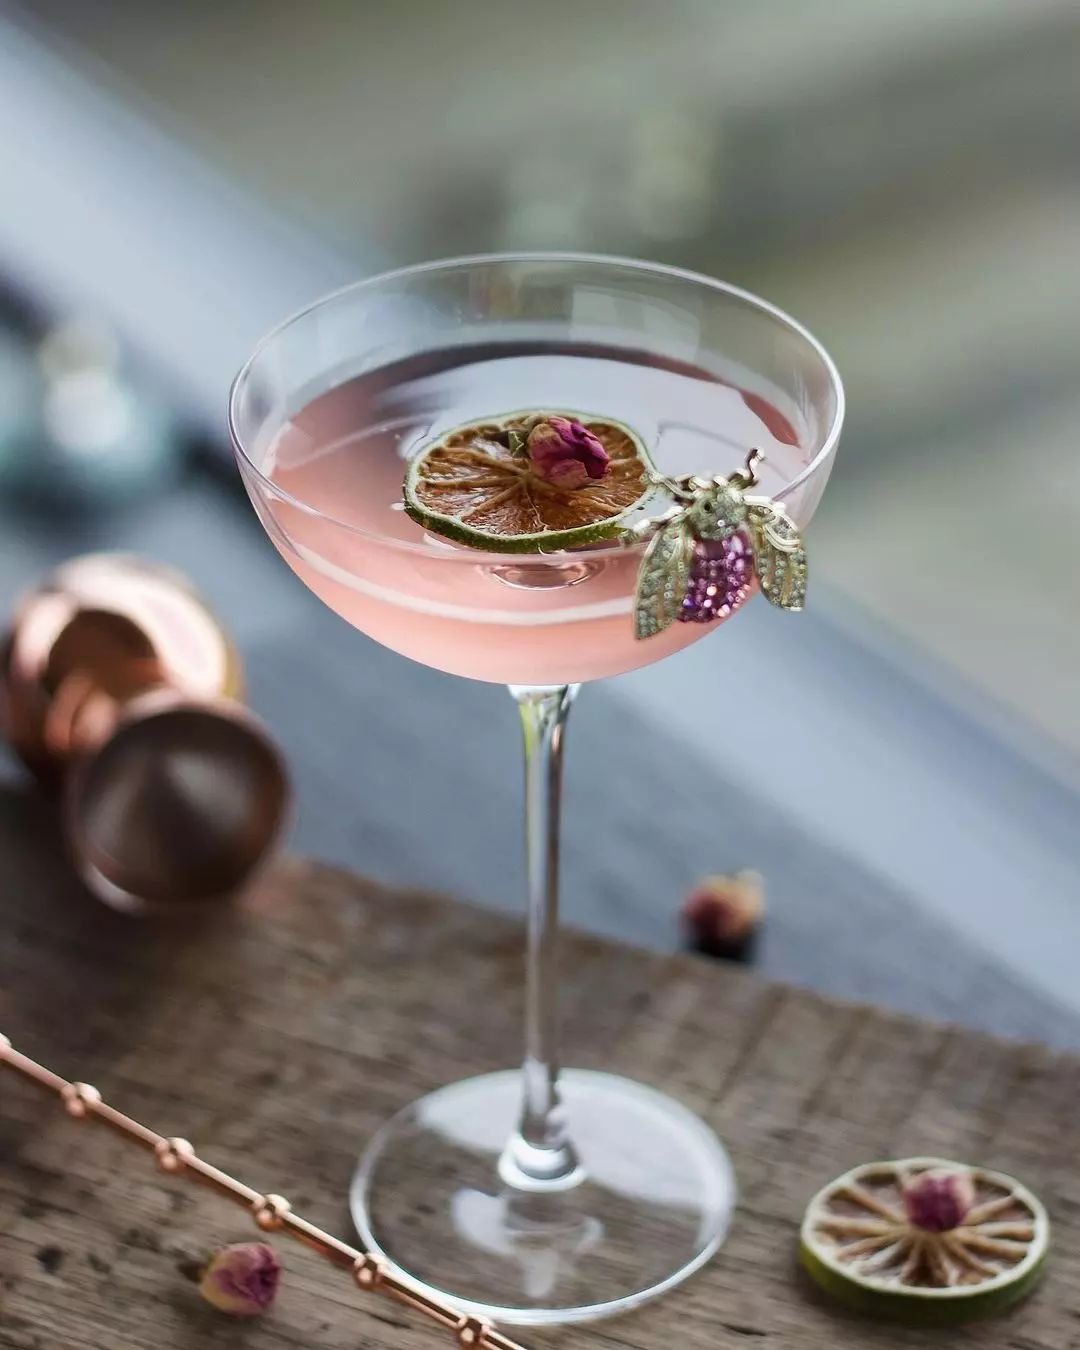 Transport yourself to the French Rivera with @thecocktail.blog's recent creation, the 'French Vanilla &amp; Rose' 🌹

45cl Gin @chardonbeni_gin 
1.5 cl White Vermouth
0.5 cl French Vanilla Syrup
0.5 cl Lanique
2 Dashes Lime Bitters